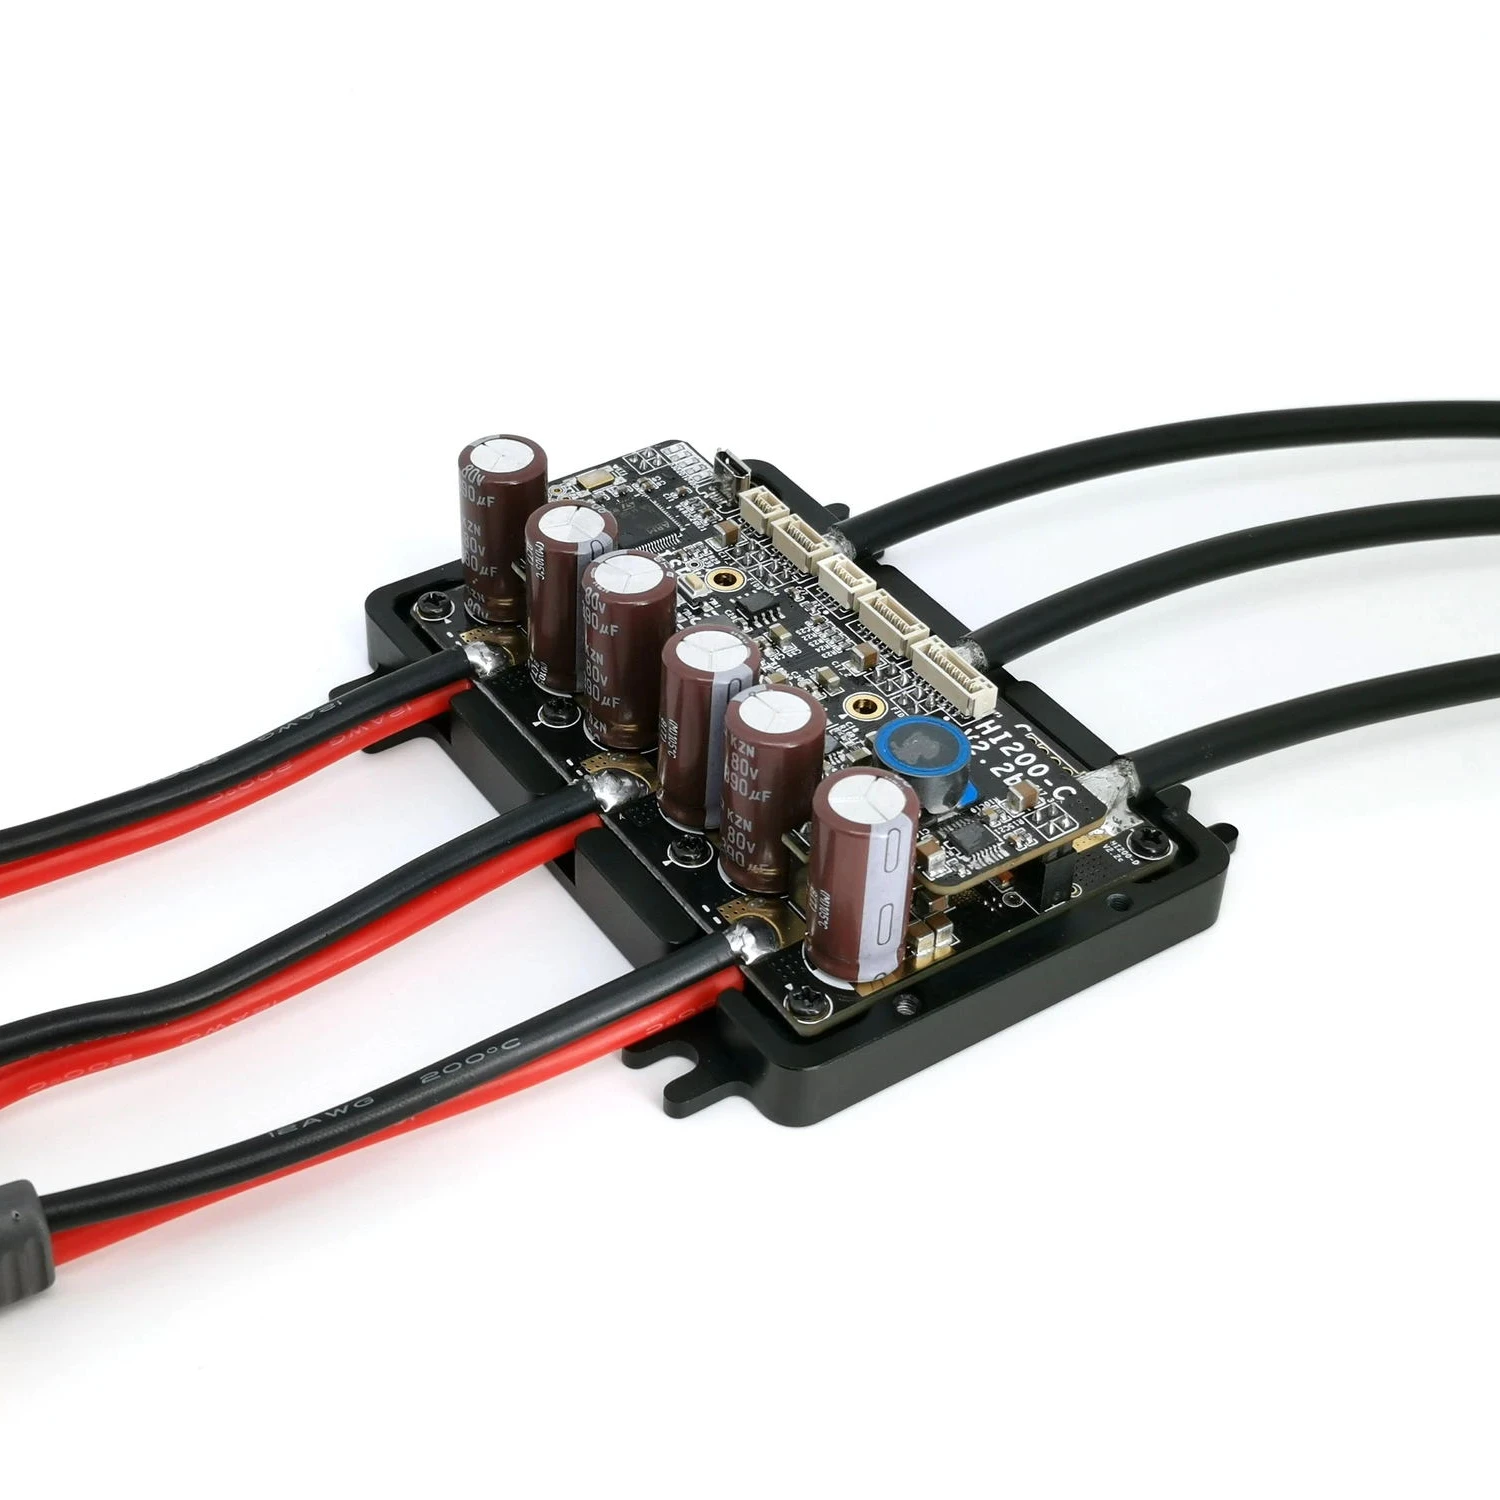 

Reacher Tech opensource VESC 16S 200a BLDC controller for 75v electric scooter